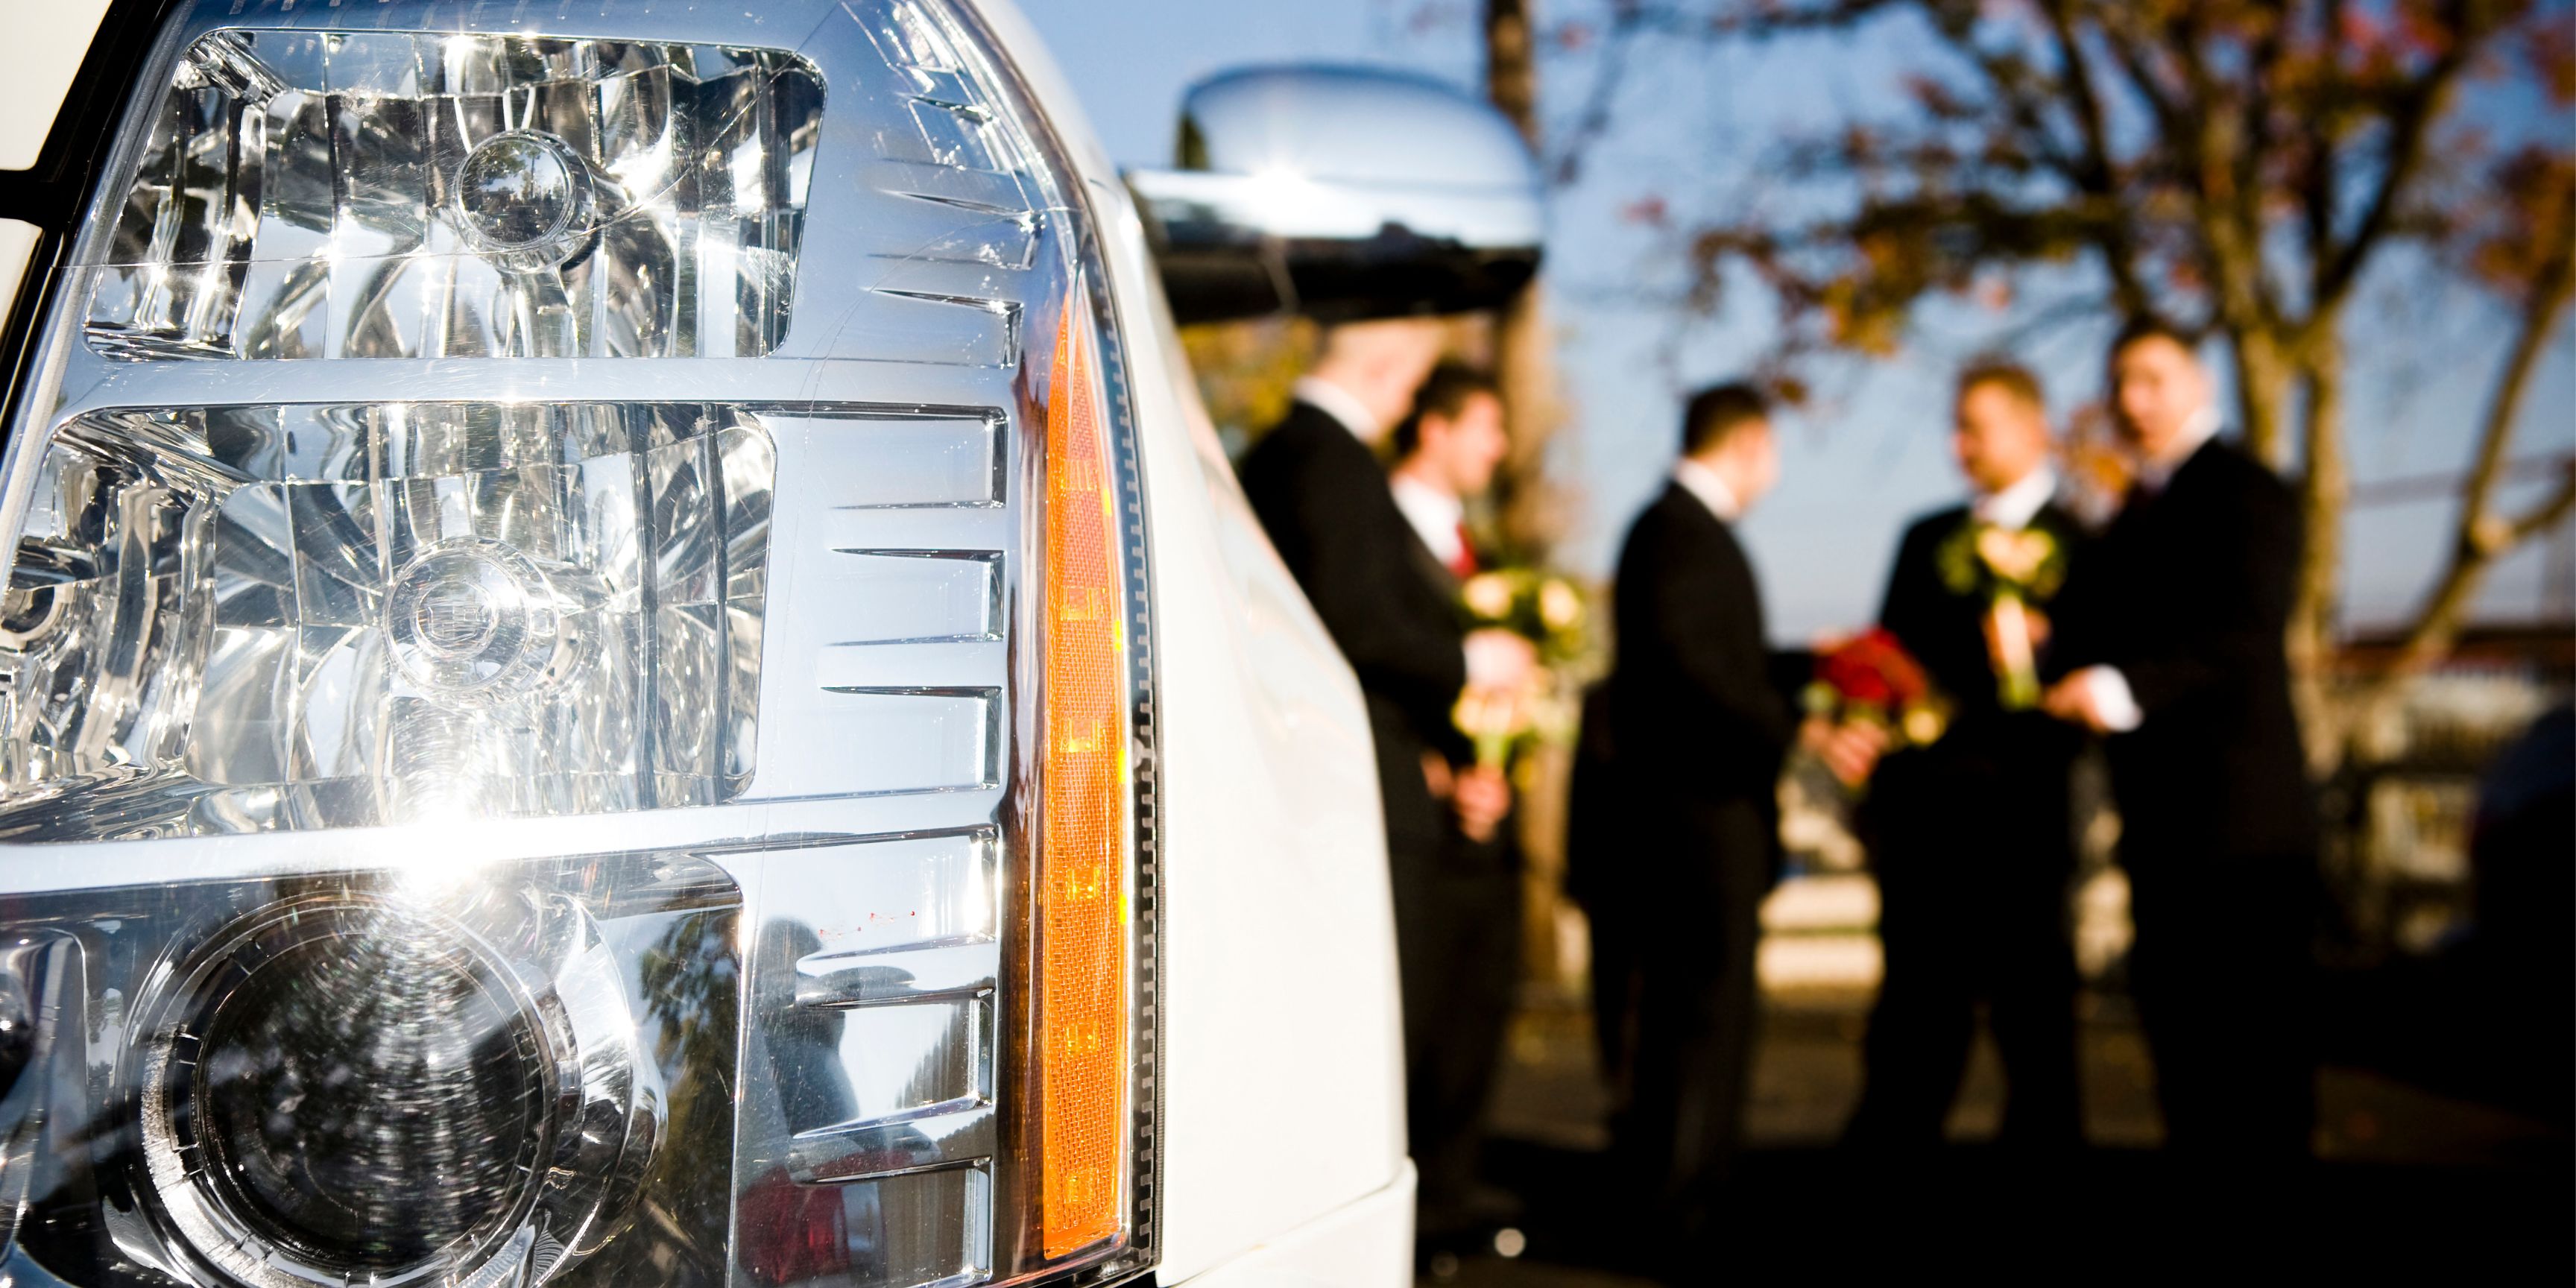 Top-of-the-Line Walnut Creek Limo Service